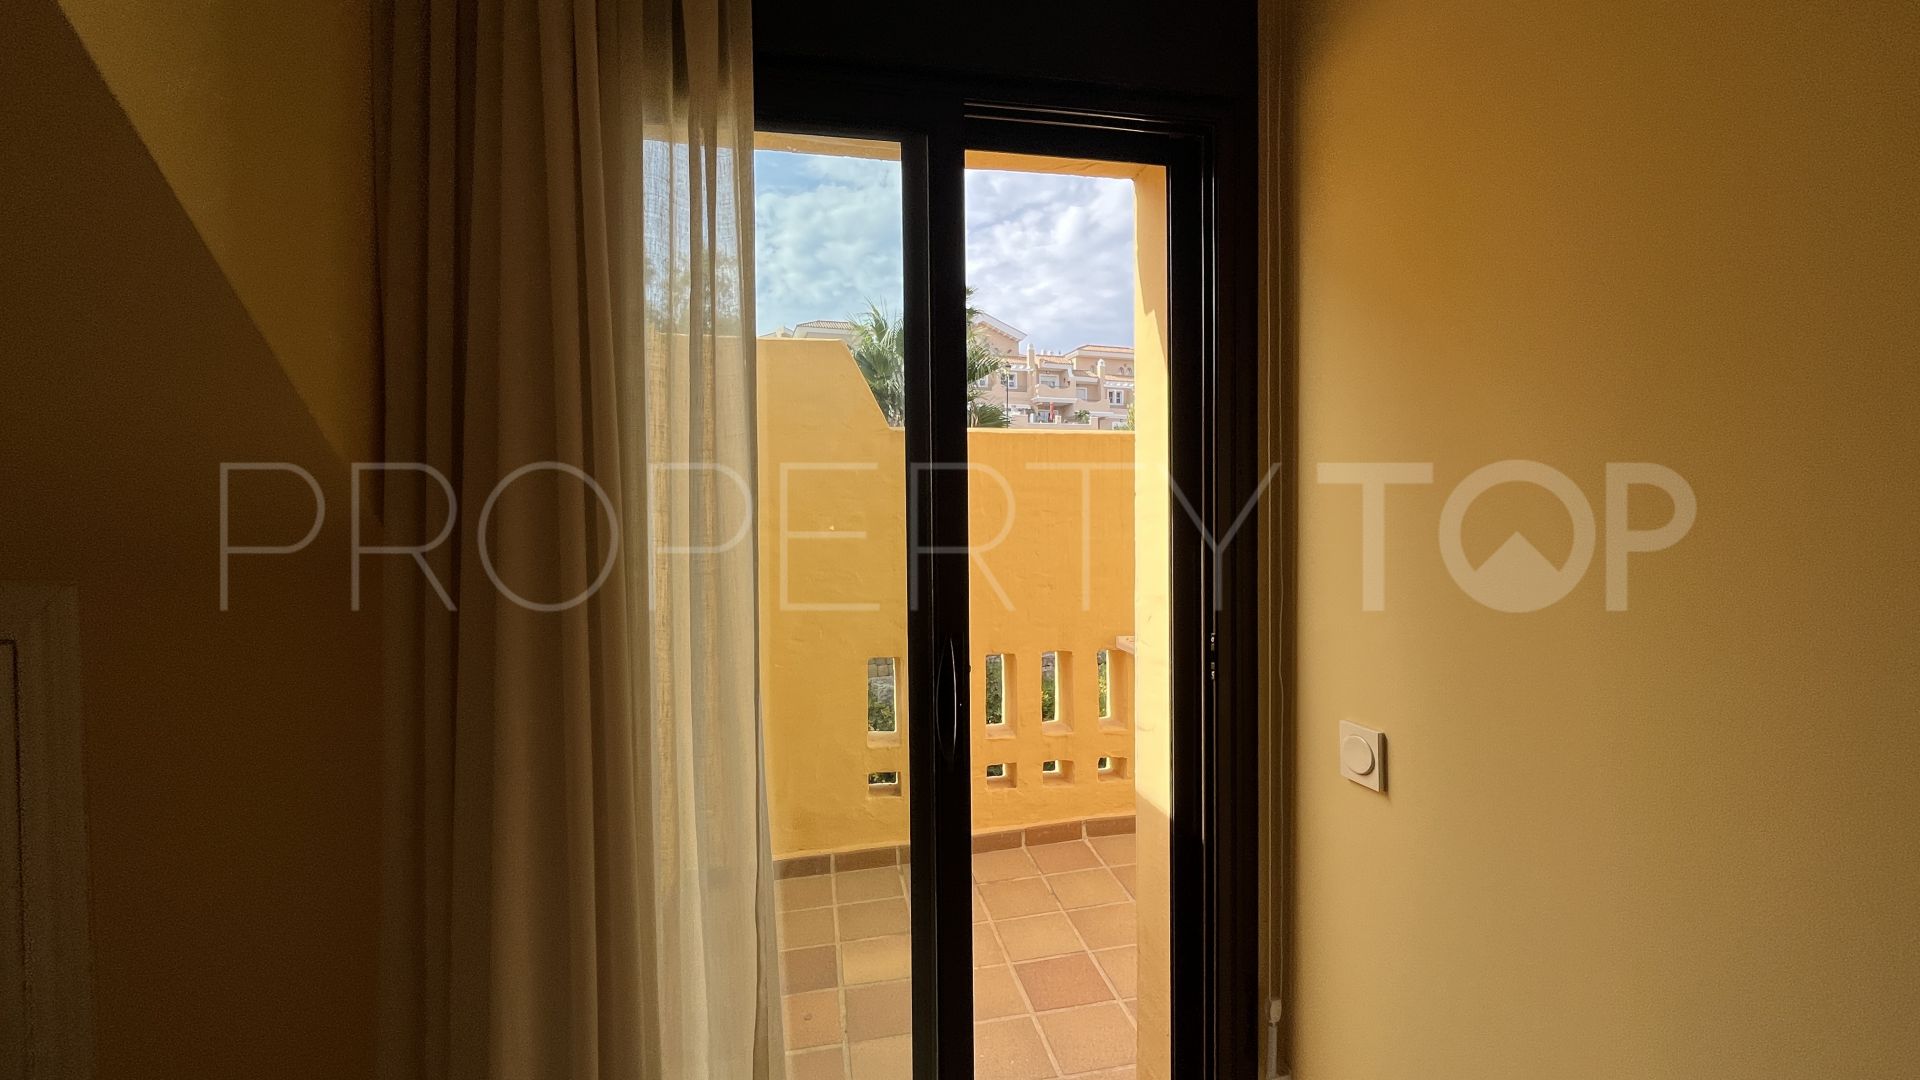 For sale penthouse in Duquesa Village with 2 bedrooms